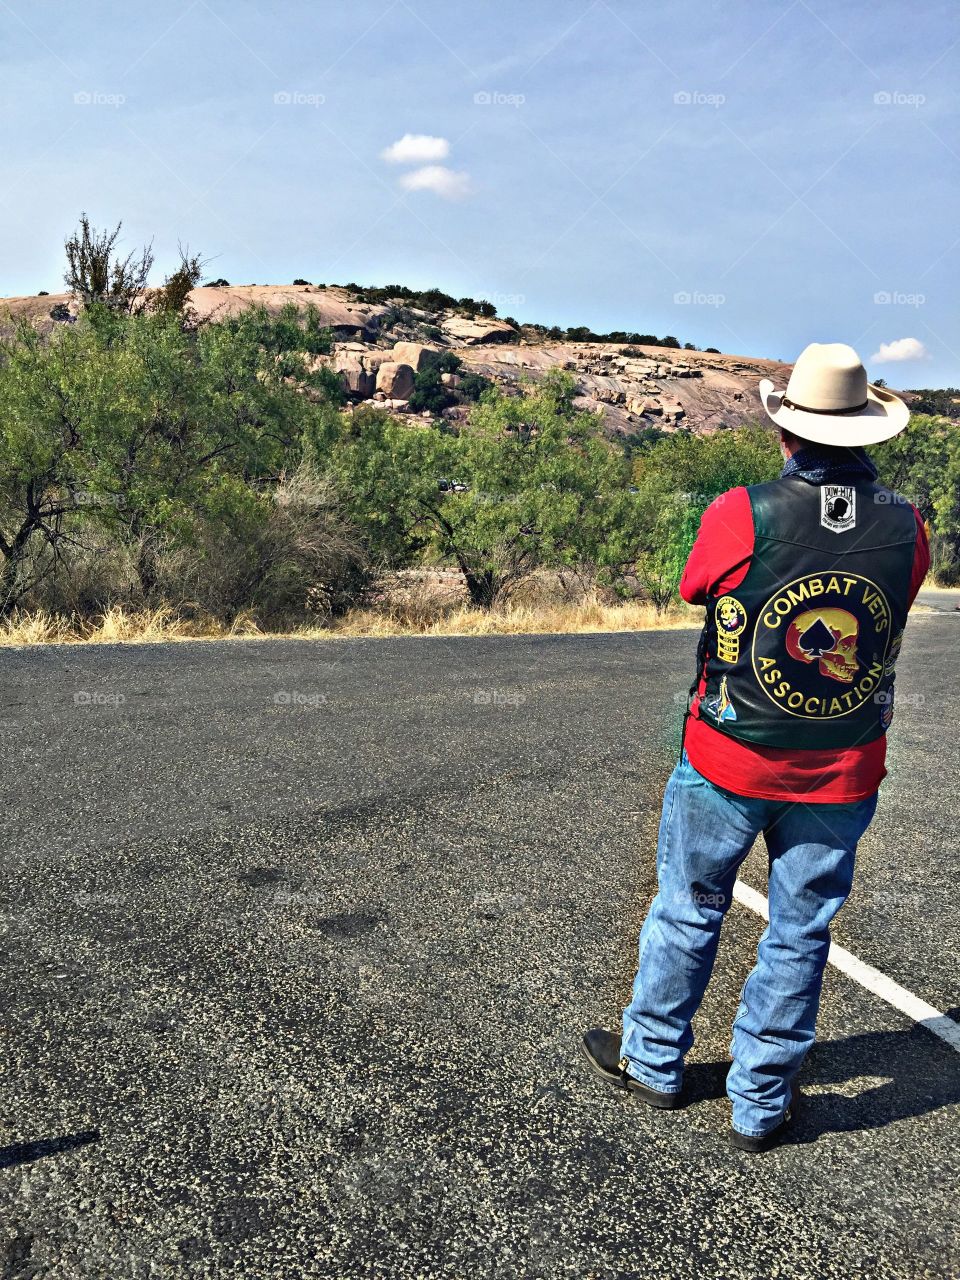 Enchanted rock. This is a Combat veteran looking at the enchanted rock in Texas